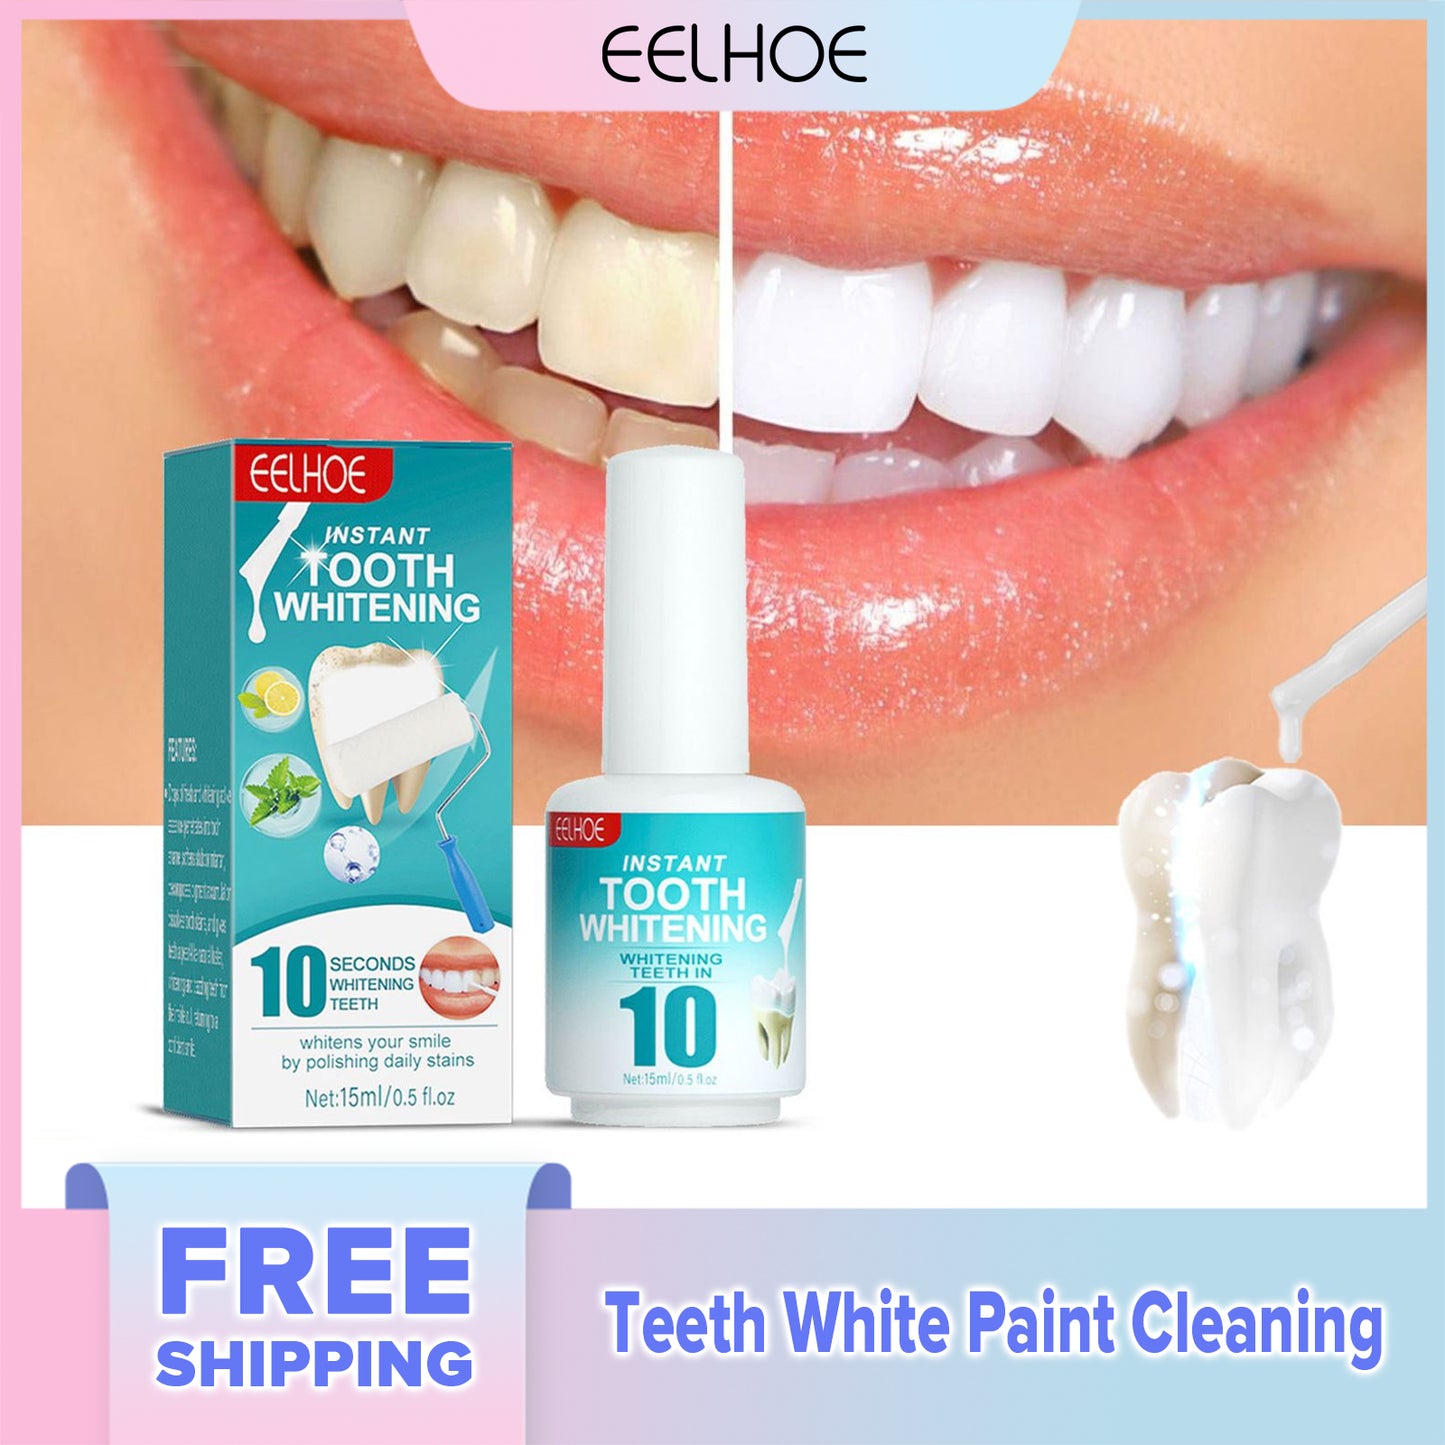 EELHOE Teeth White Paint Cleaning Dental Stains Tartar Anti-pigmentation Cleaning Bad Breath Care Dental Paint (15ml)